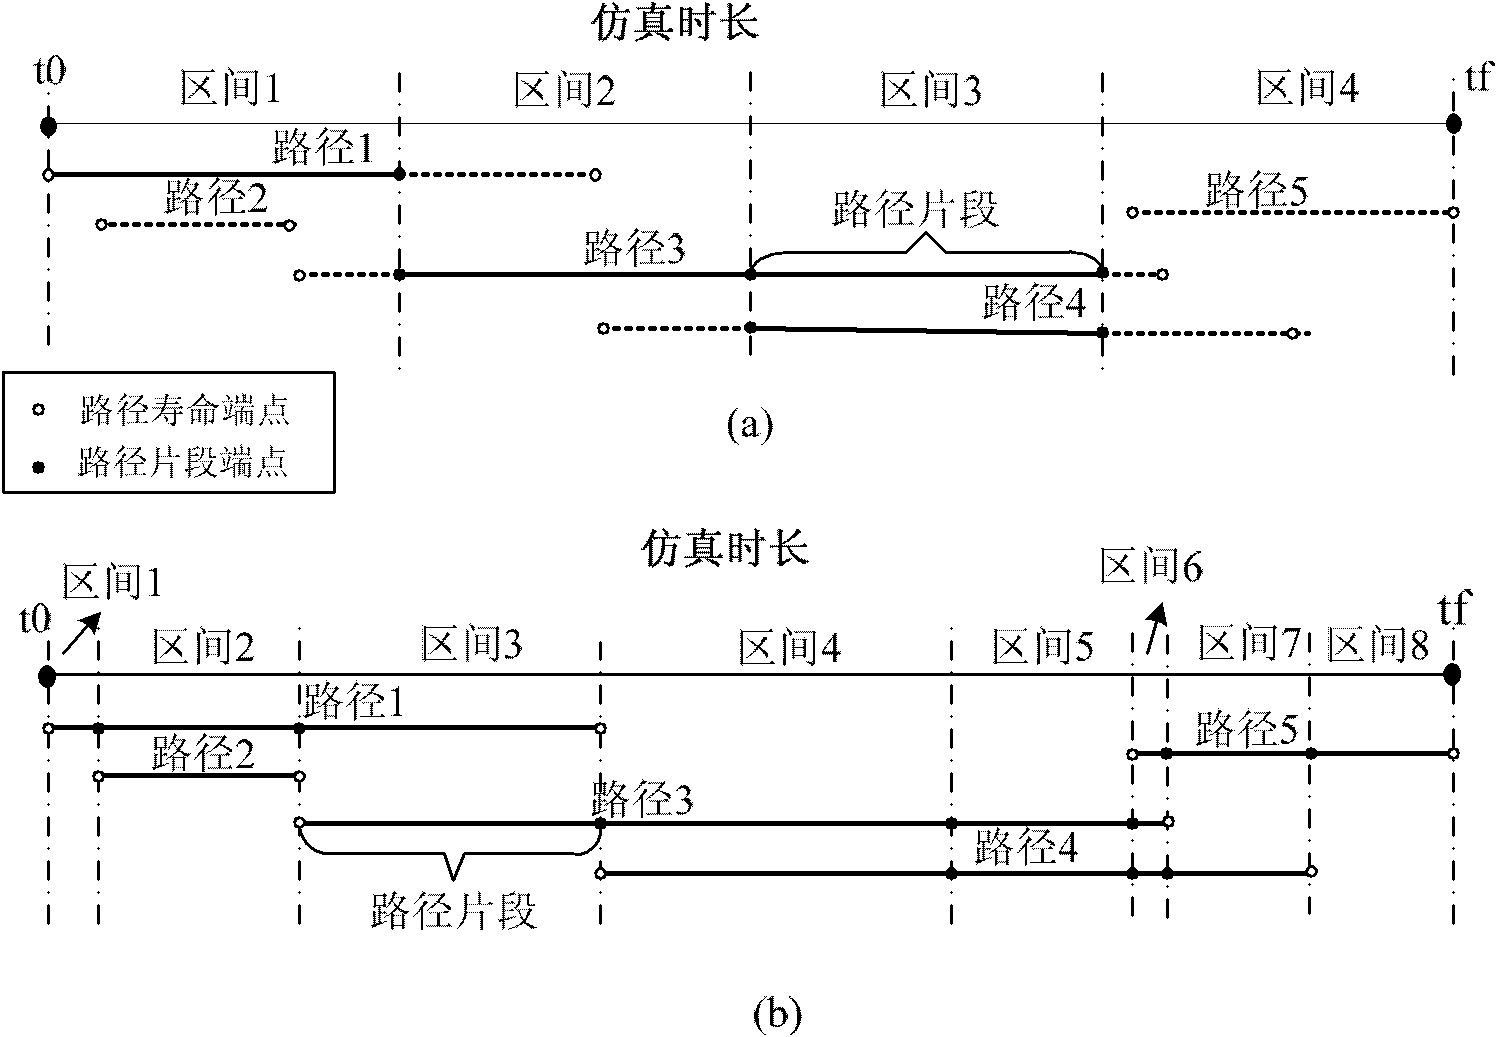 Continuous state routing algorithm of satellite link network